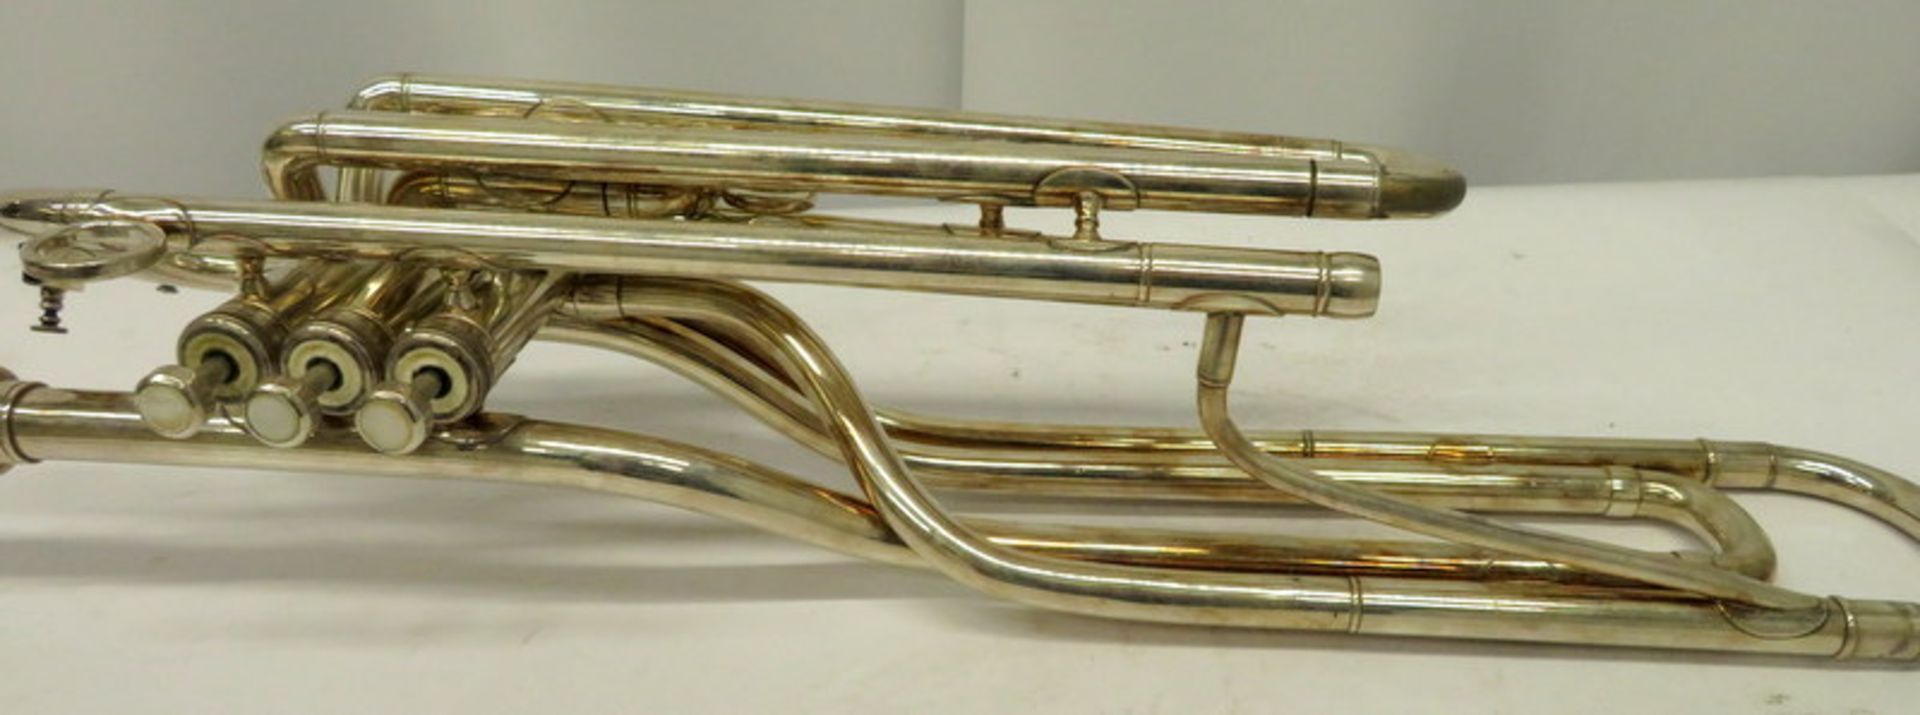 Boosey & Hawkes Imperial Fanfare Trumpet With Case. Serial Number: 591890. Please Note T - Image 10 of 14